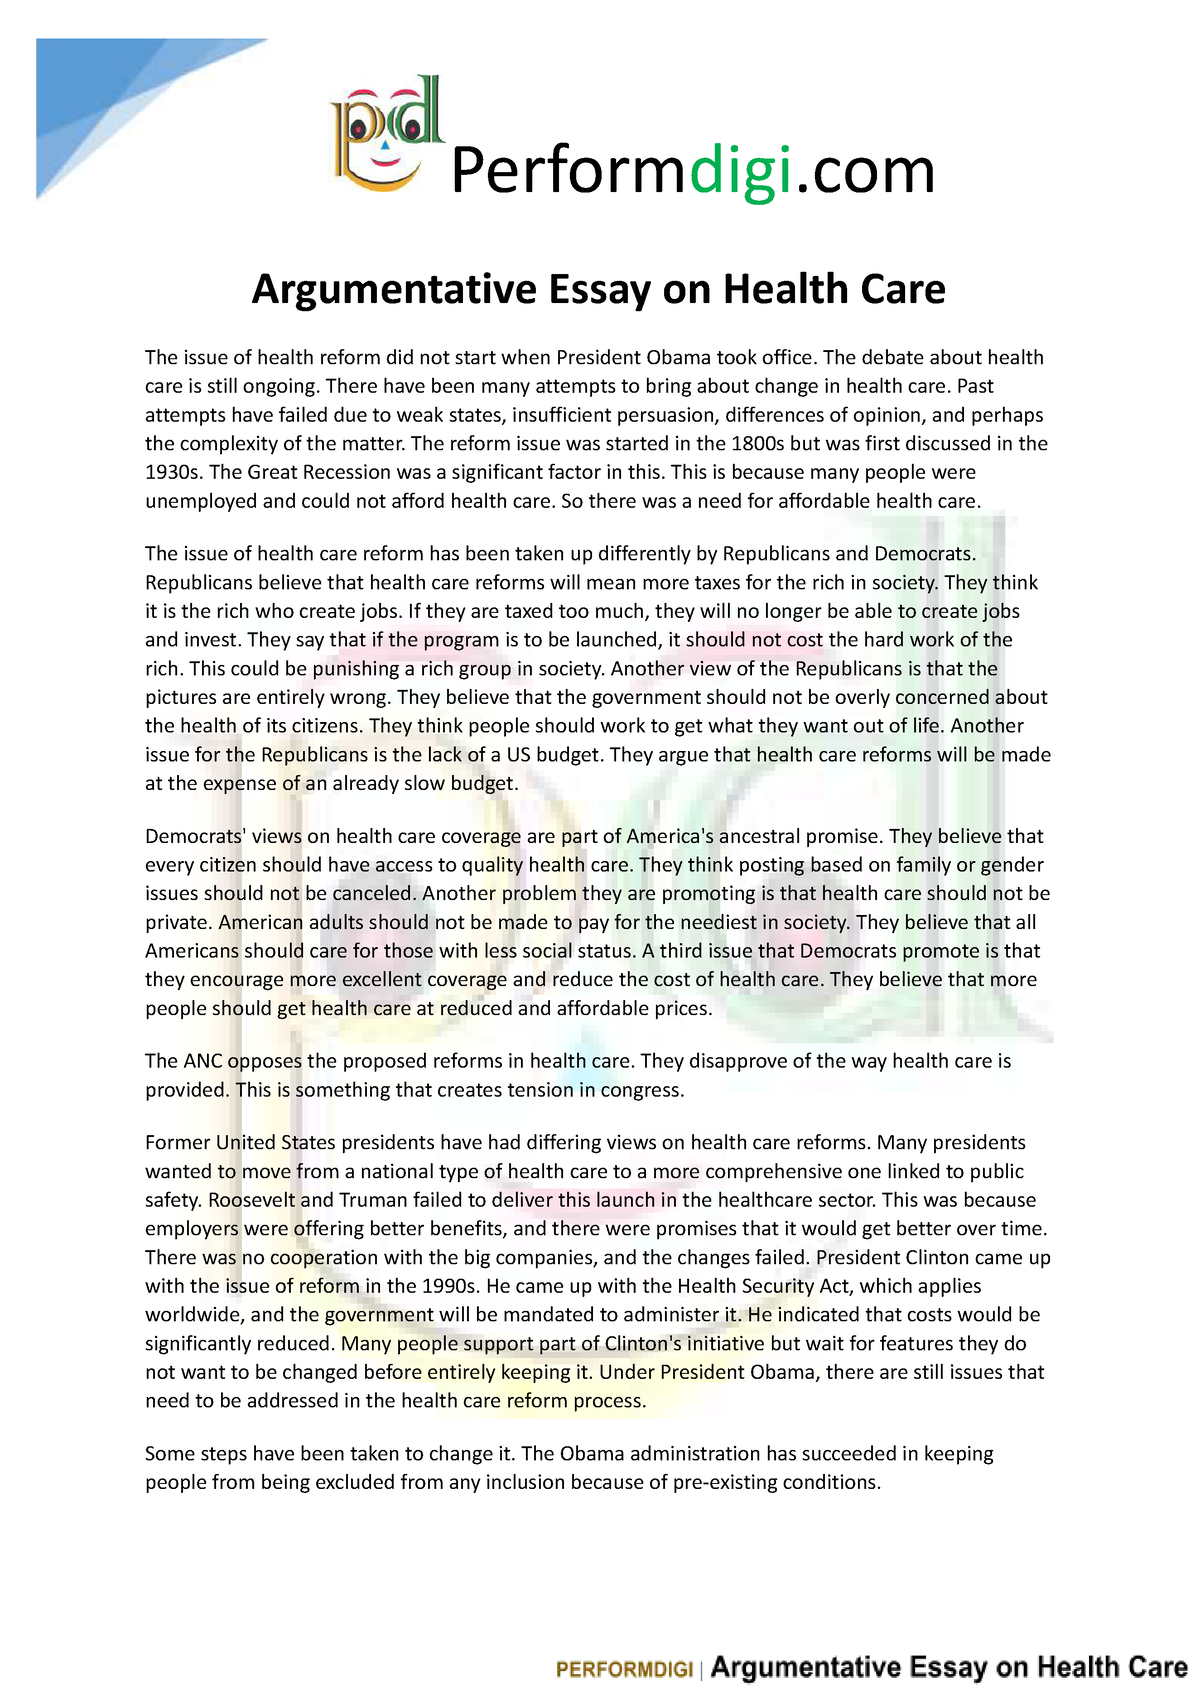 writing an argumentative essay about health care